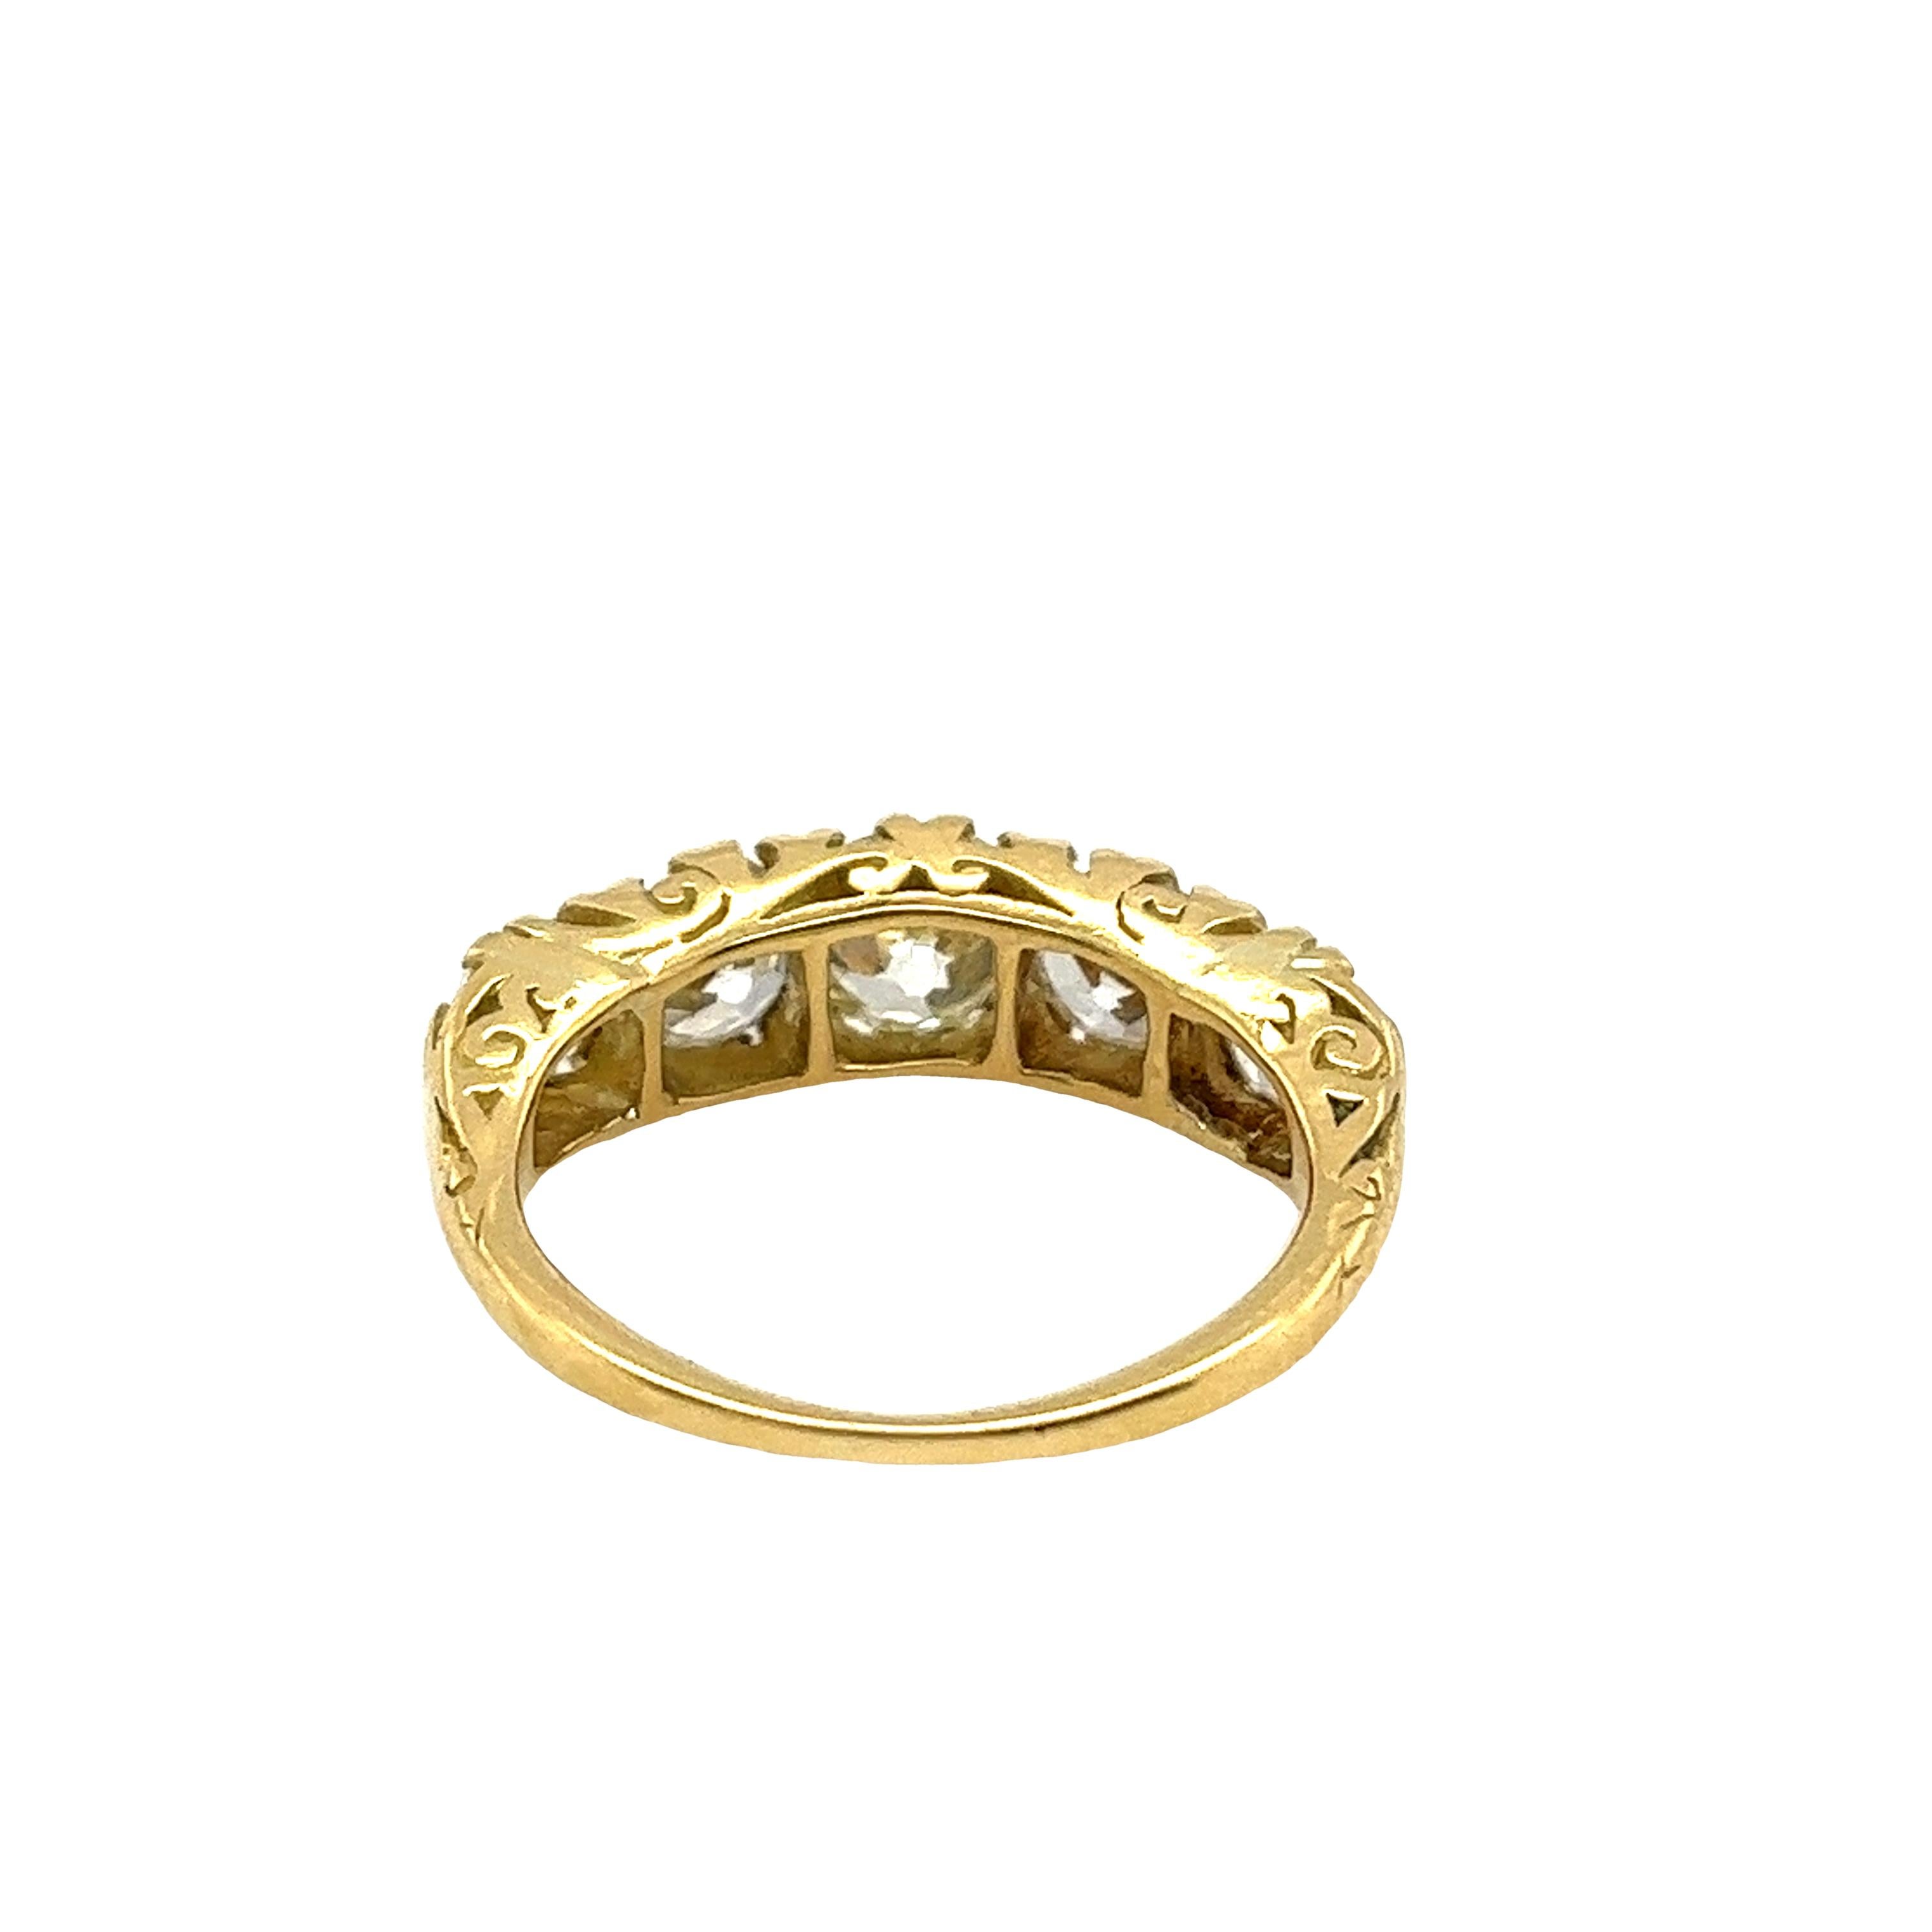 Women's Vintage 18ct Yellow Gold Diamond 5 Stone Ring, 1.95ct Total Diamond Weight. For Sale